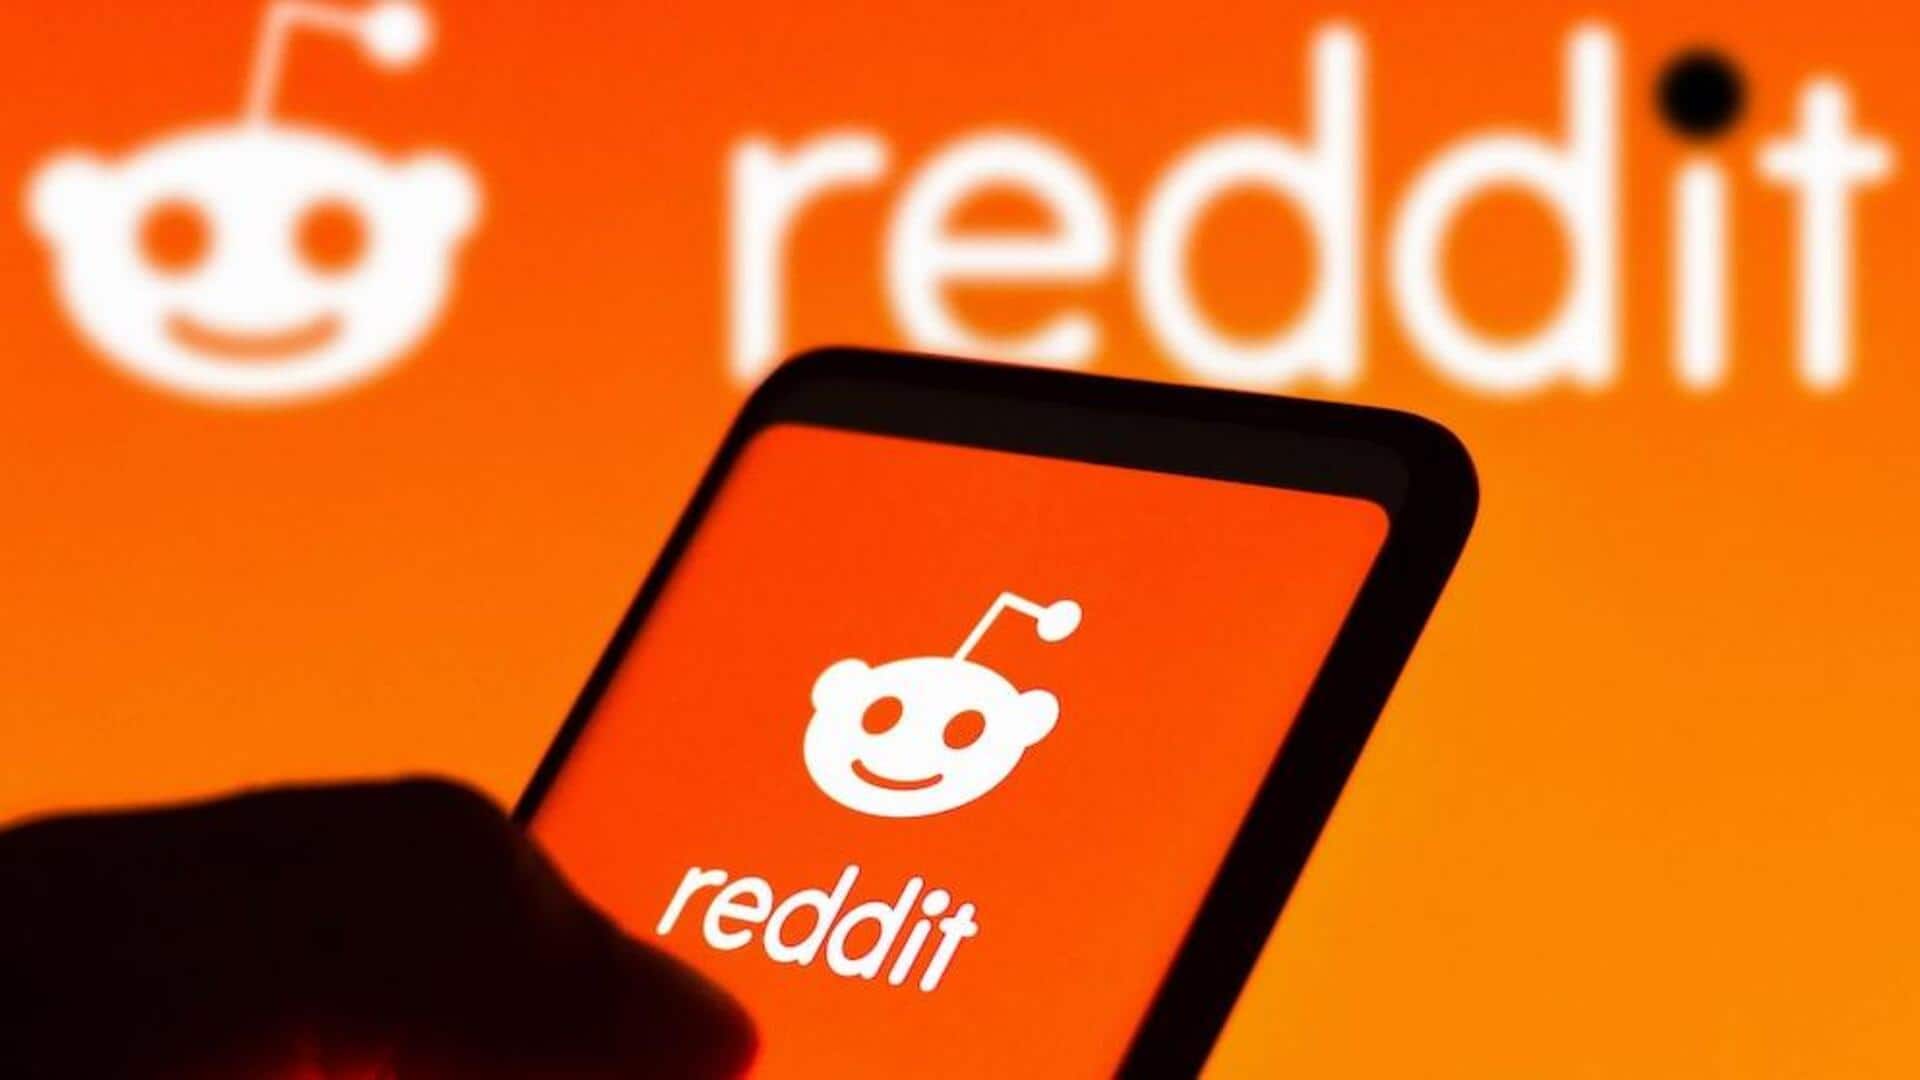 Reddit offering shares to top 75,000 users ahead of IPO